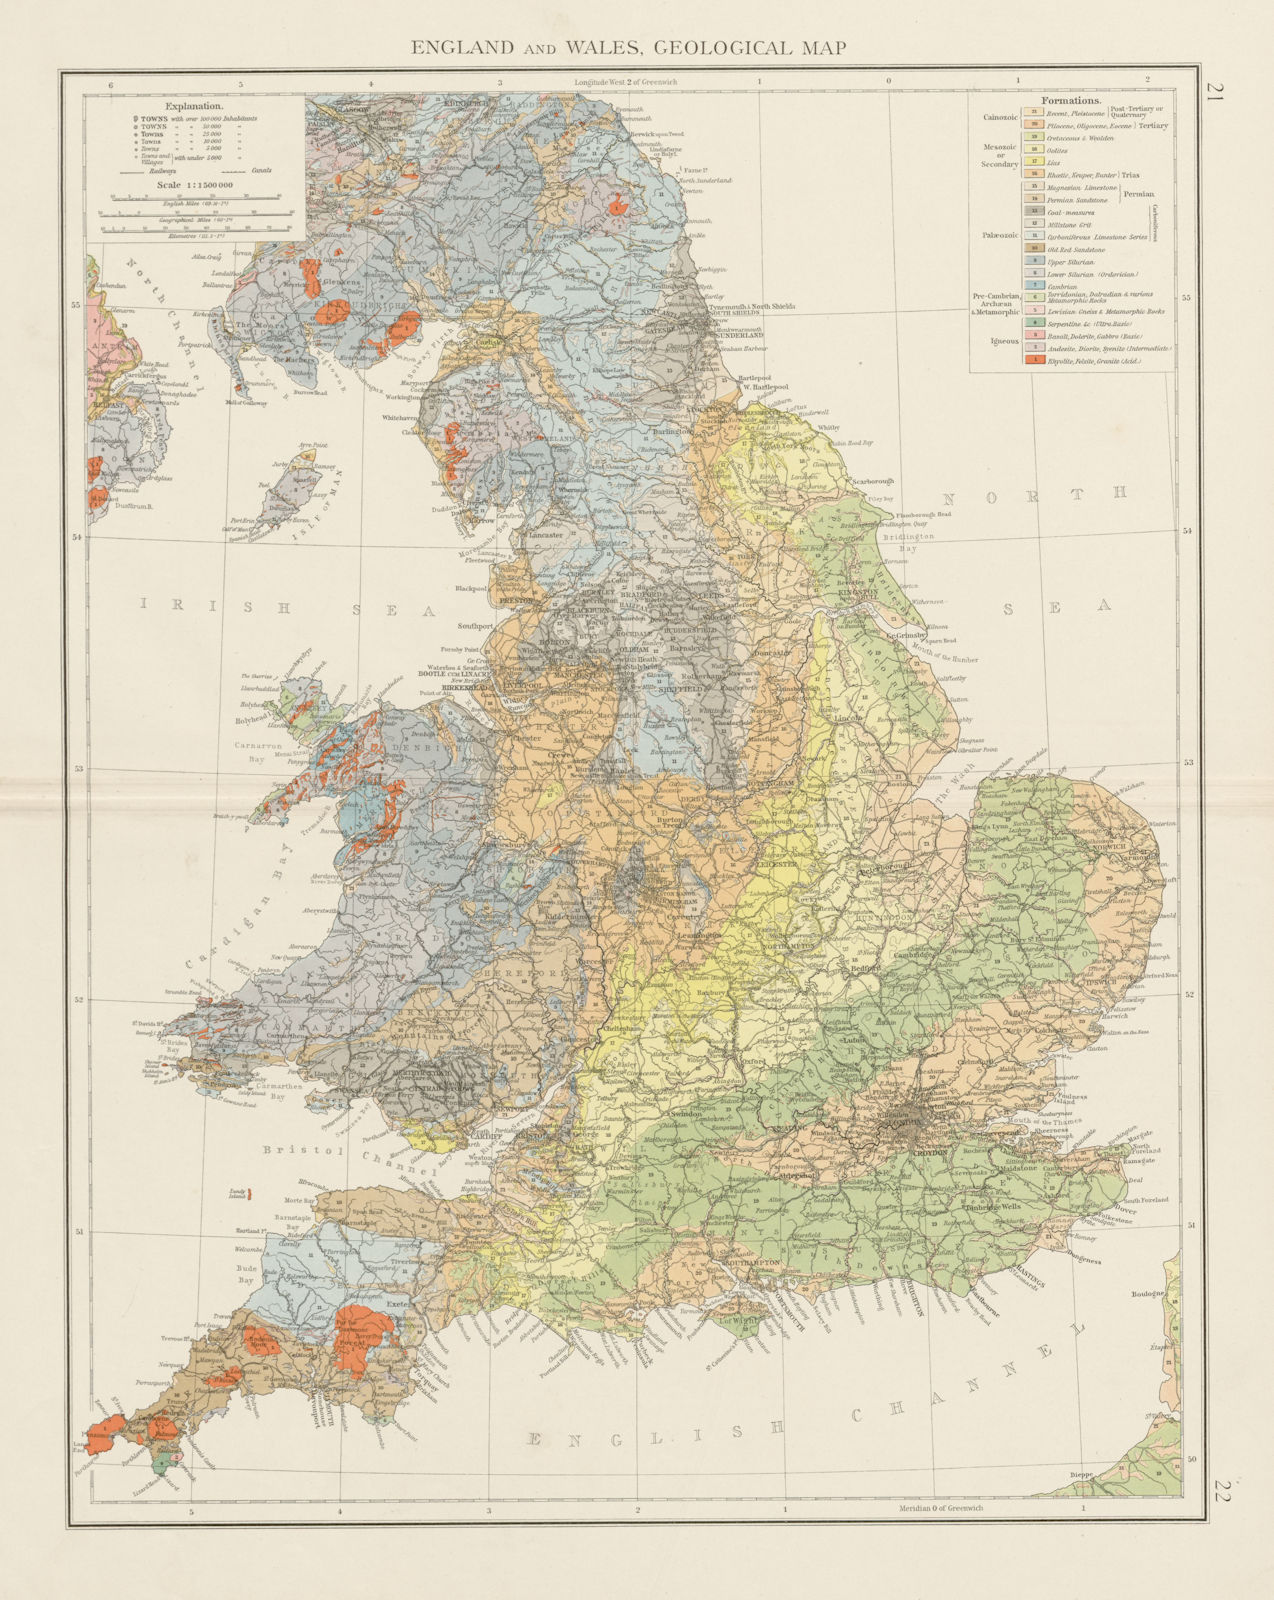 Associate Product England and Wales, geological map. THE TIMES 1900 old antique plan chart